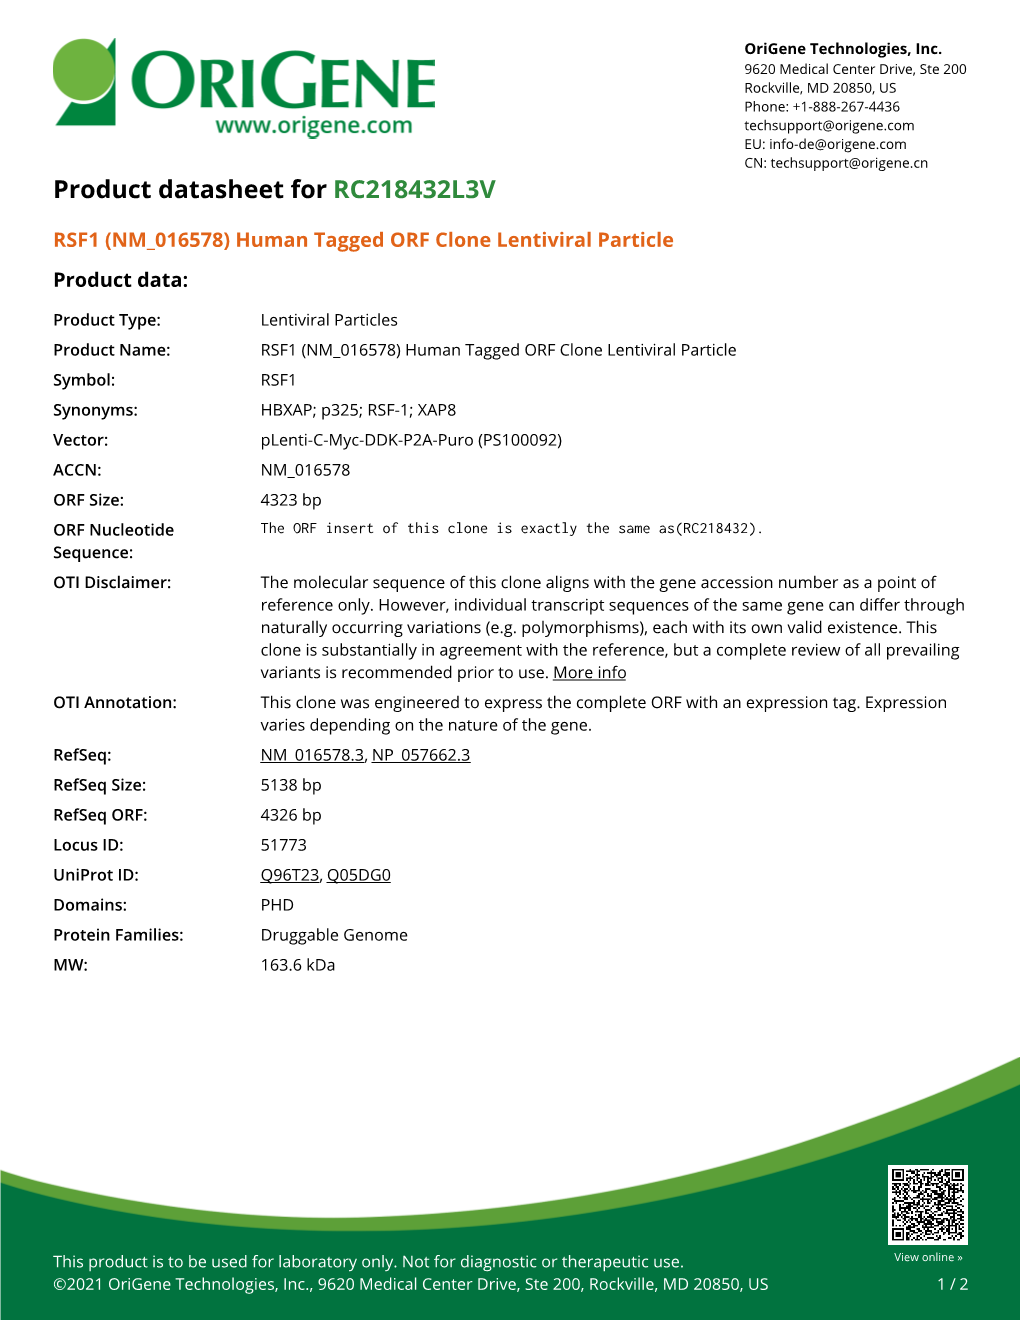 RSF1 (NM 016578) Human Tagged ORF Clone Lentiviral Particle Product Data